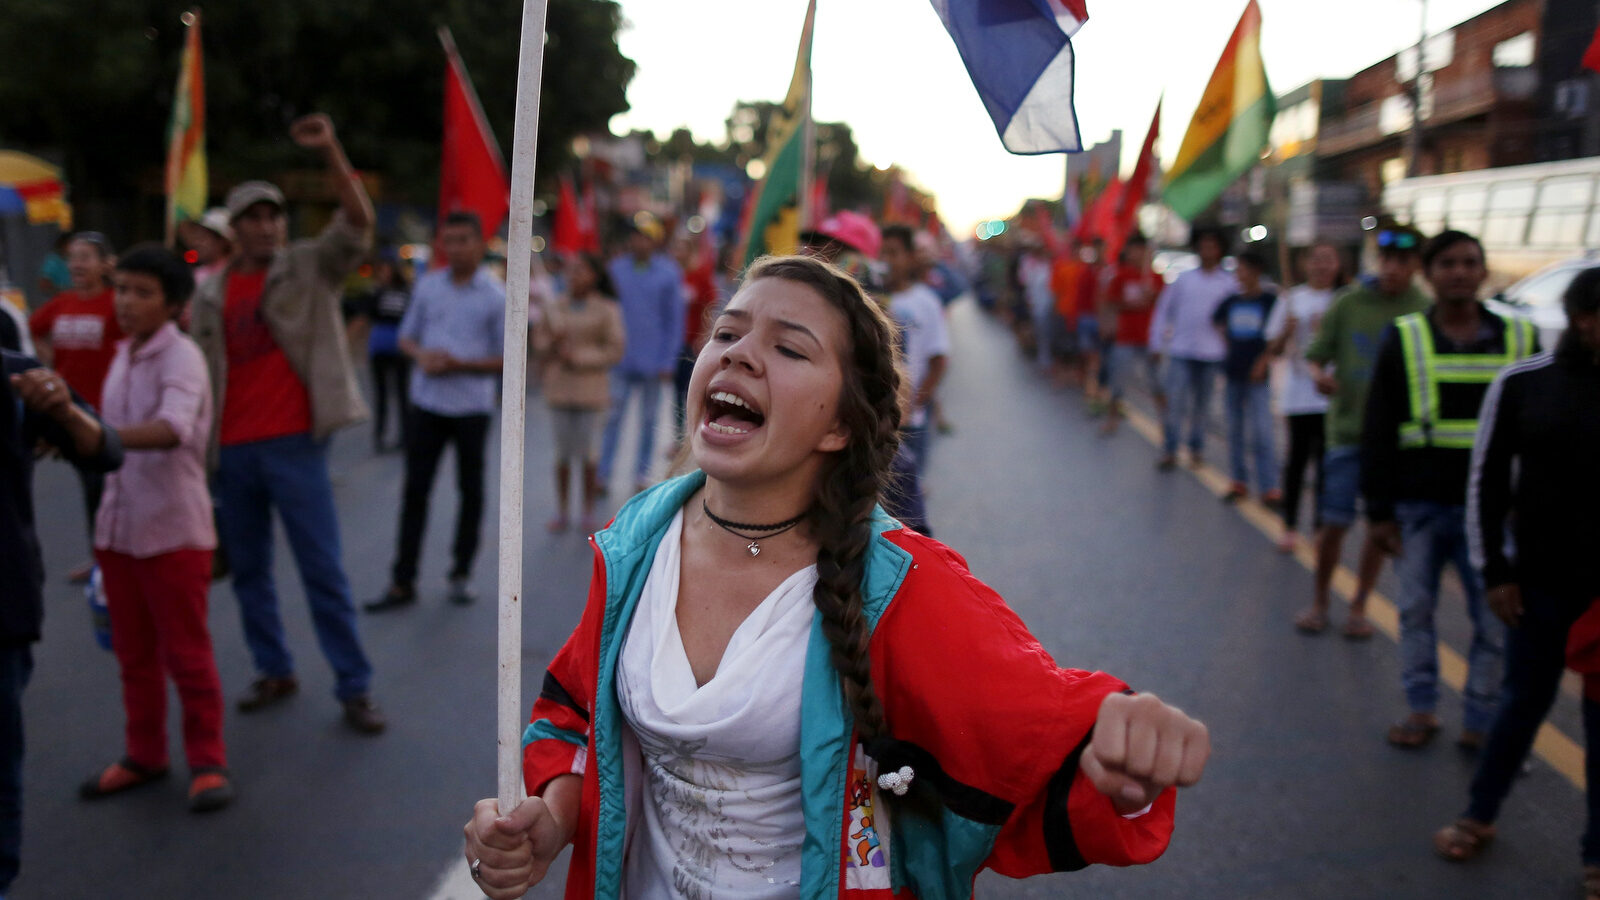 Paraguayans taking part in the “Long March” protest, a week-long walk from the interior to the capital, chant slogans against president Horacio Cartes, in Asuncion, Paraguay, Monday, Feb. 13, 2017. Organized by the Paraguay Pyahura Party or New Paraguay Party in Guarani, the walk is a protest against the government of Cartes who they say only protects the interest of landowners and soybean production, leaving aside the poor. The protesters are demanding access to health, education and housing, and the resignation of Cartes. (AP/Jorge Saenz)